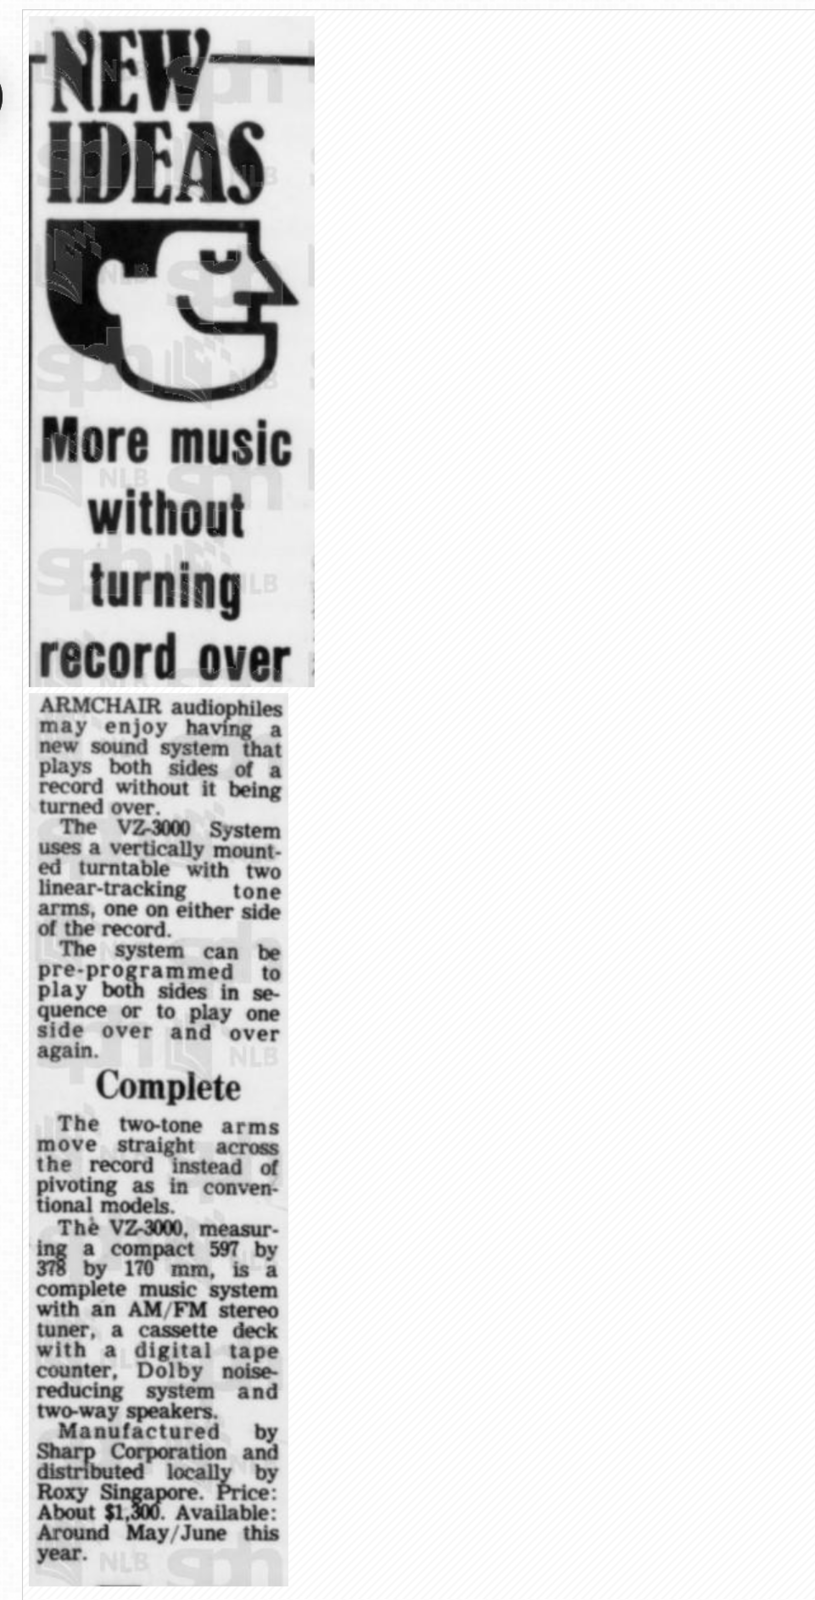 NEW IDEAS More music without turning record over The Straits Times 1981.png